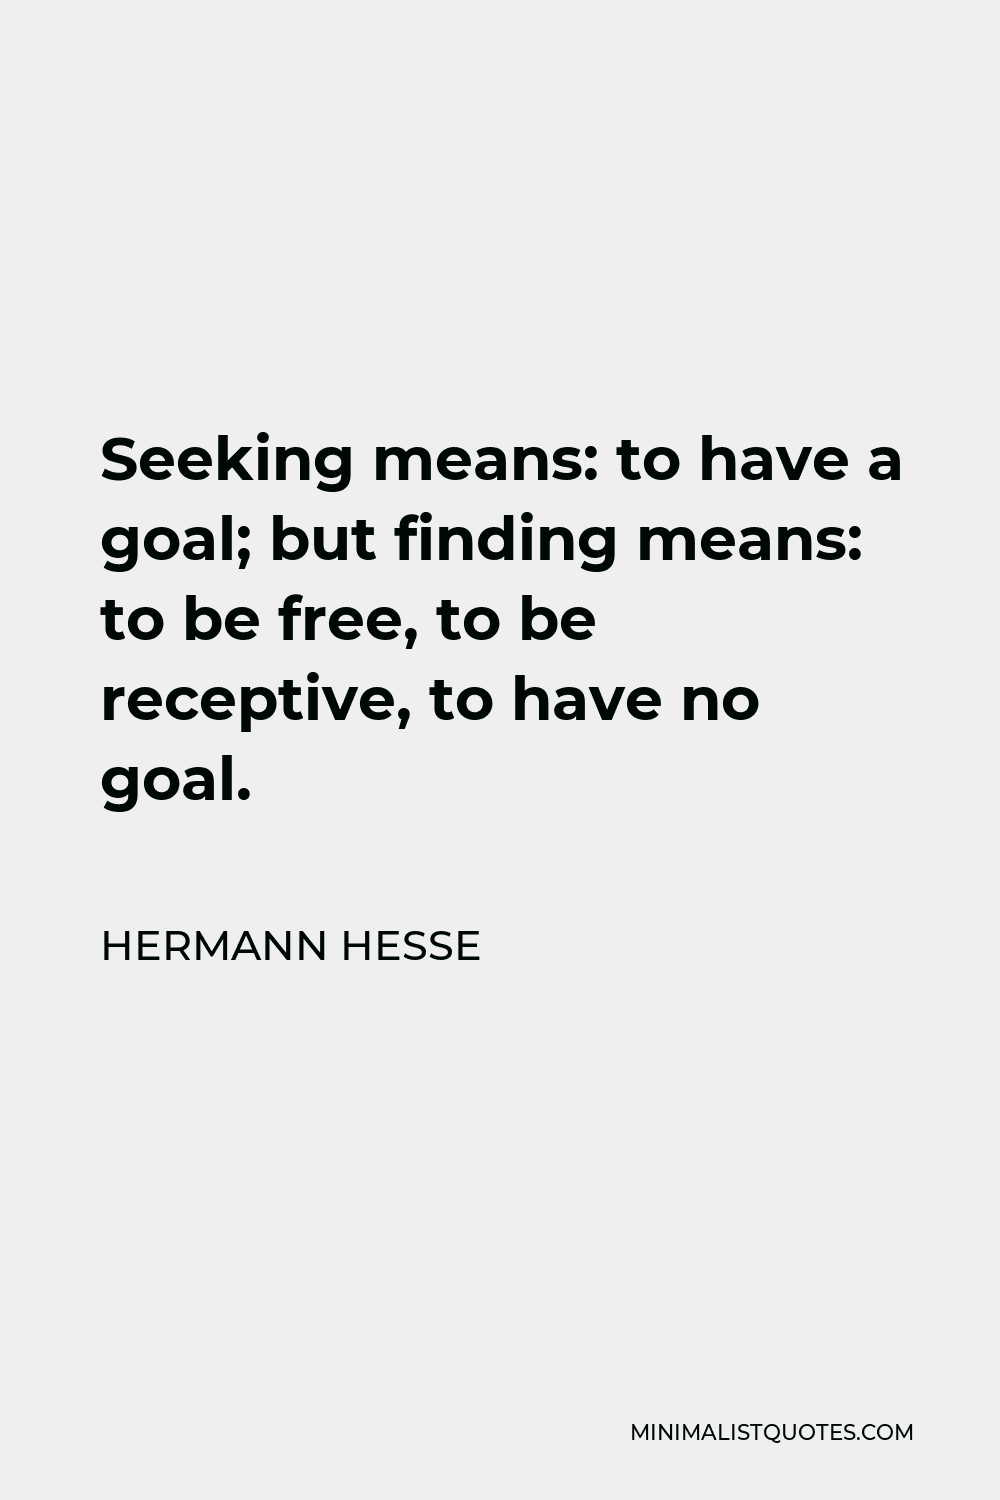 Hermann Hesse Quote - Seeking means: to have a goal; but finding means: to be free, to be receptive, to have no goal.